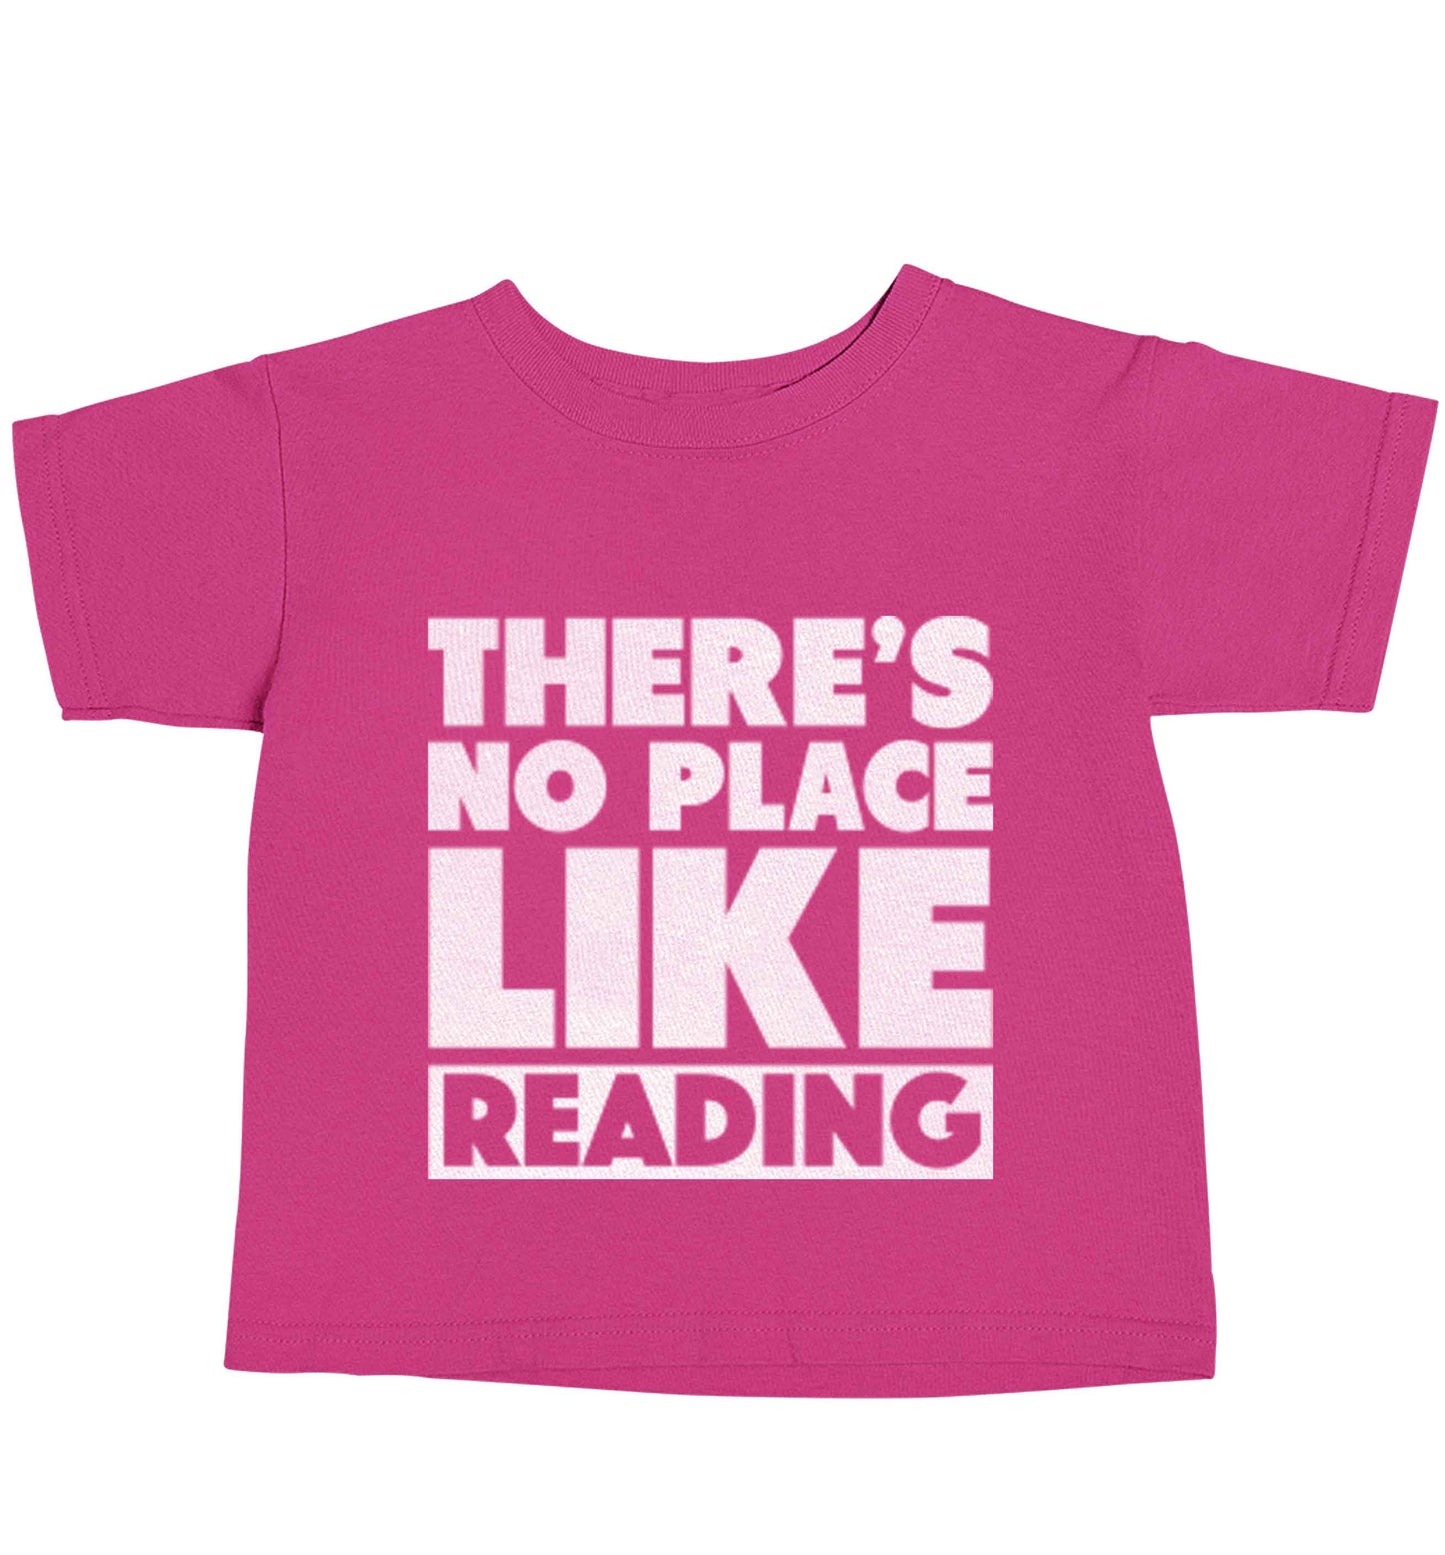 There's no place like Readingpink baby toddler Tshirt 2 Years